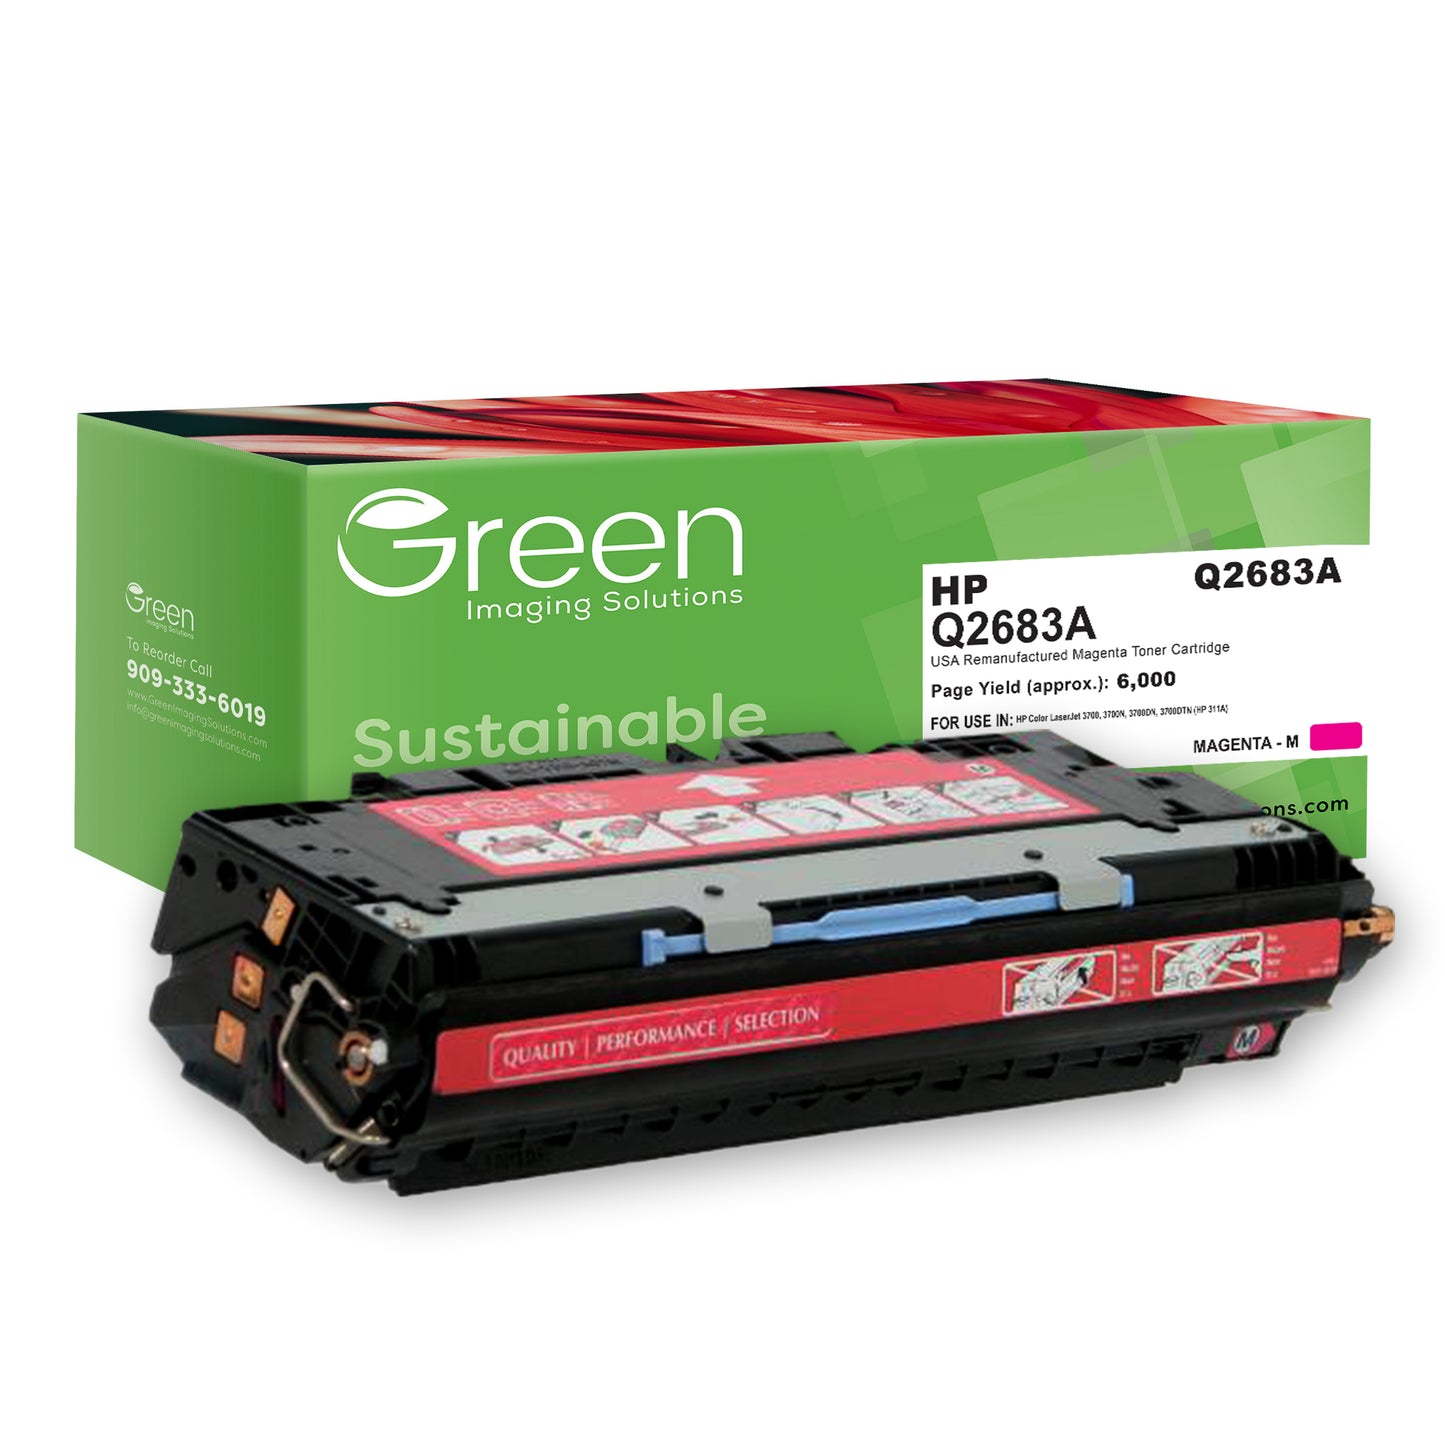 GIS USA Remanufactured Magenta Toner Cartridge for HP Q2683A (HP 311A)